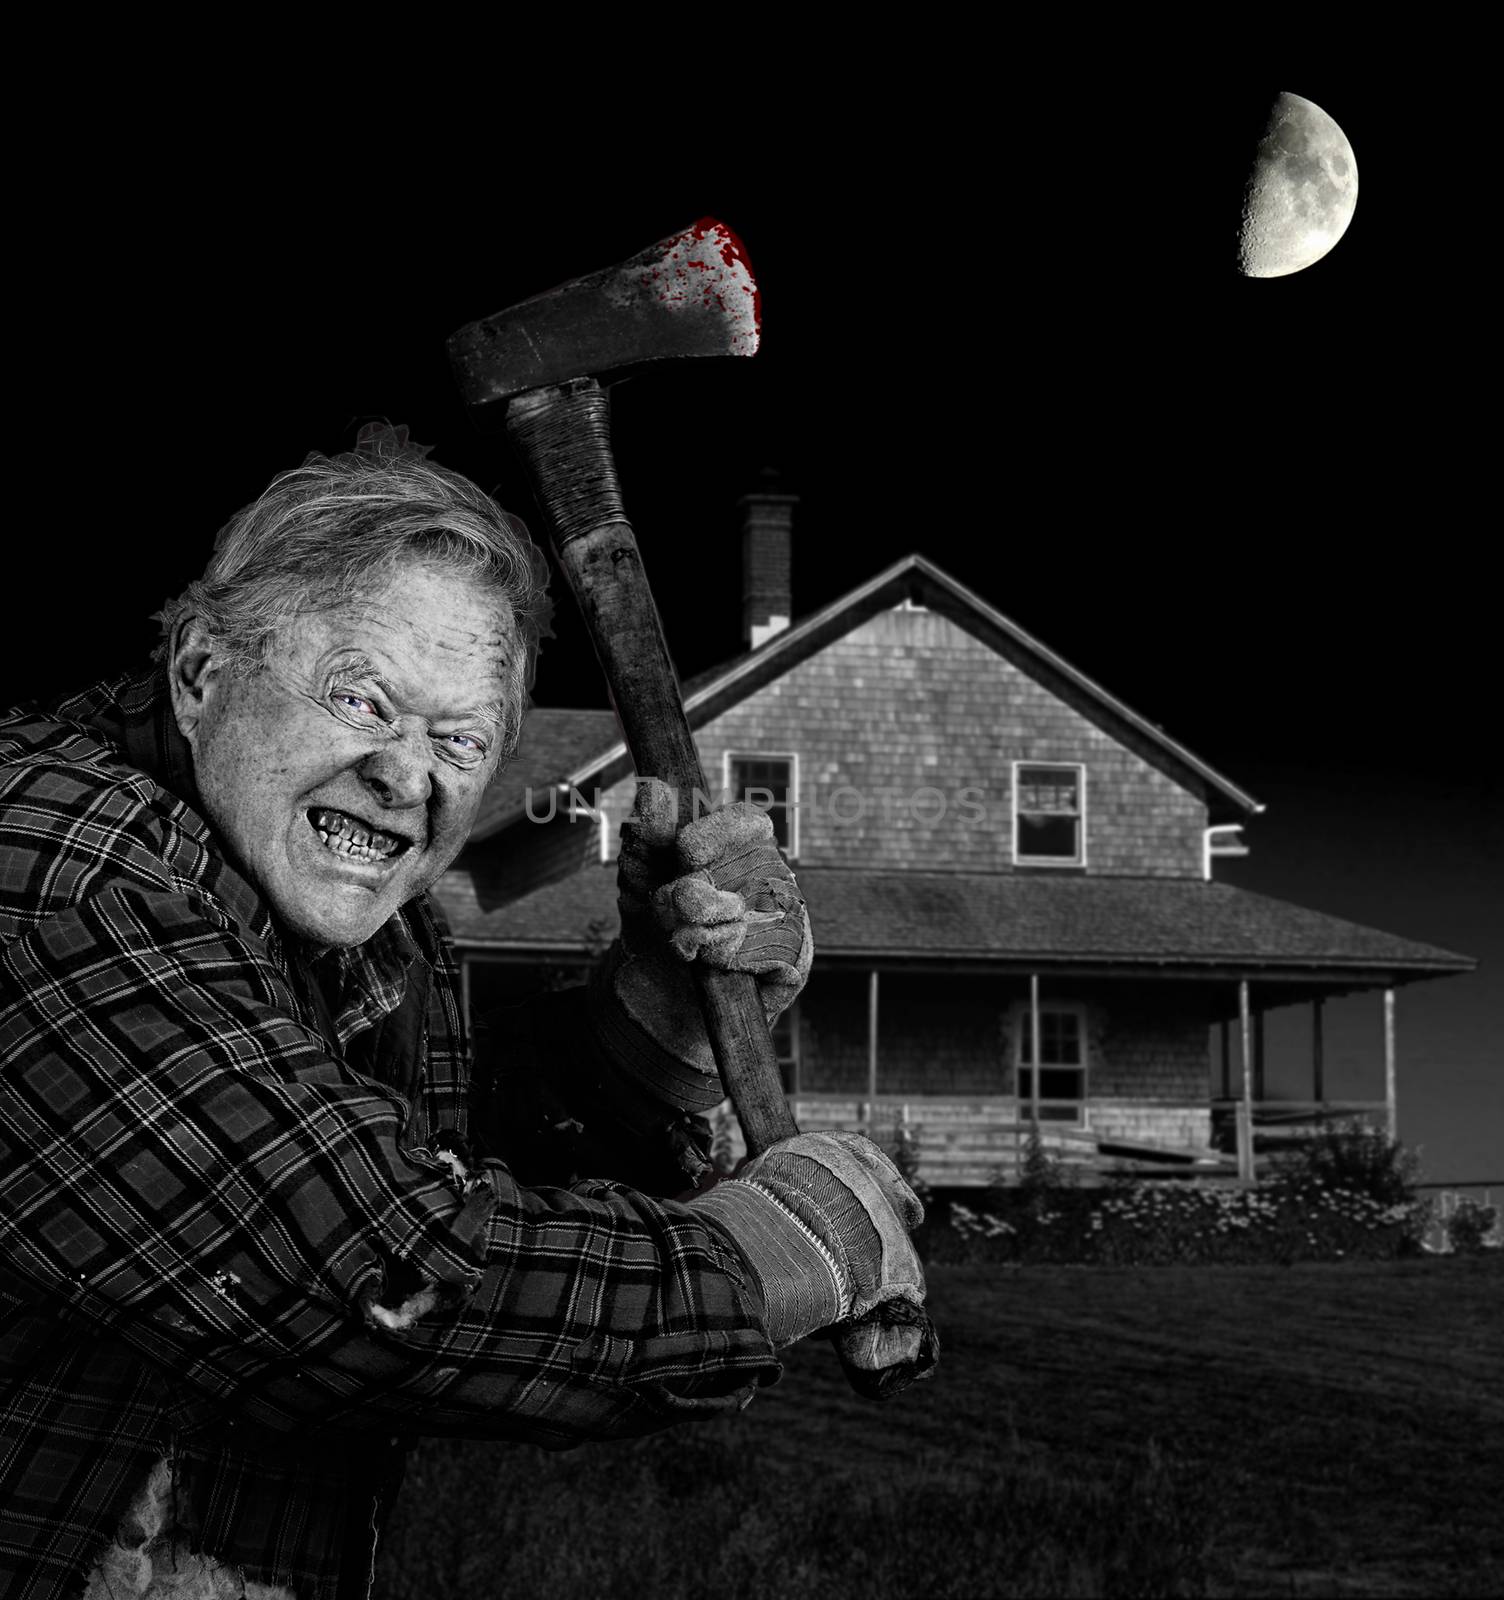 Crazy axeman and old cedar shingle house by Mirage3